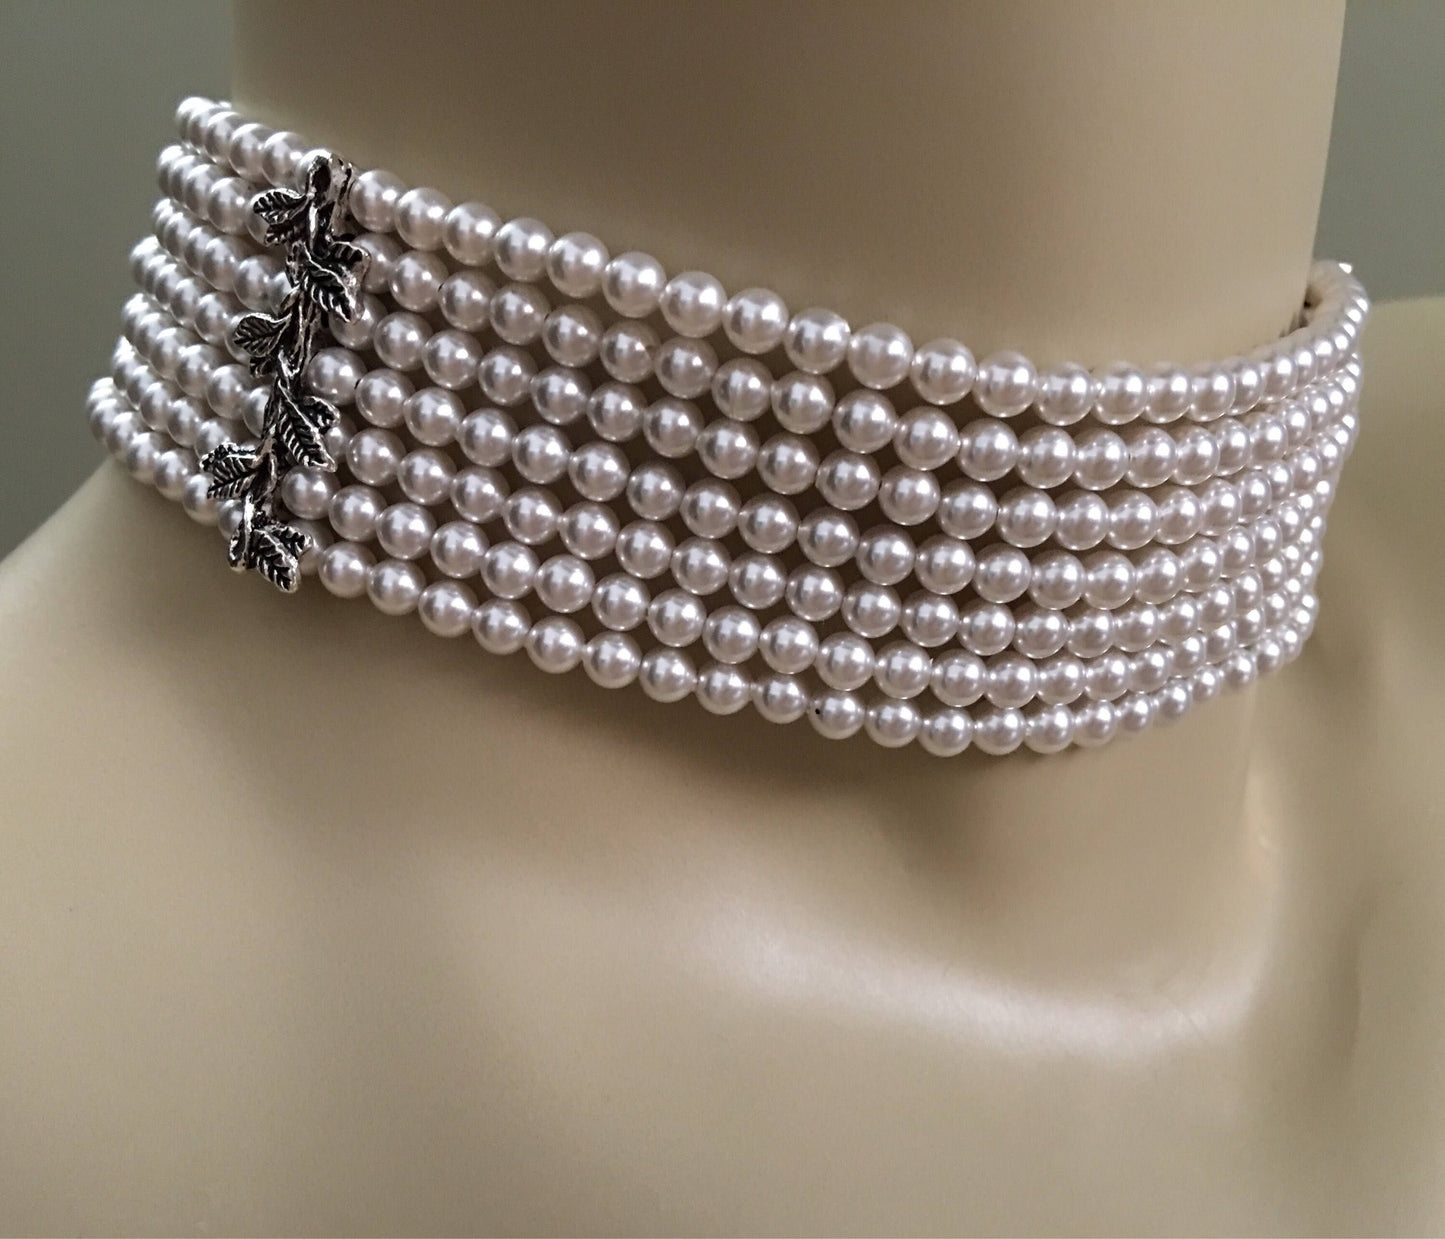 Pearl Choker Necklace Earrings Set 7 strands Swarovski pearls in white with backdrop and antique silver details Gifts for Her READY TO SHIP